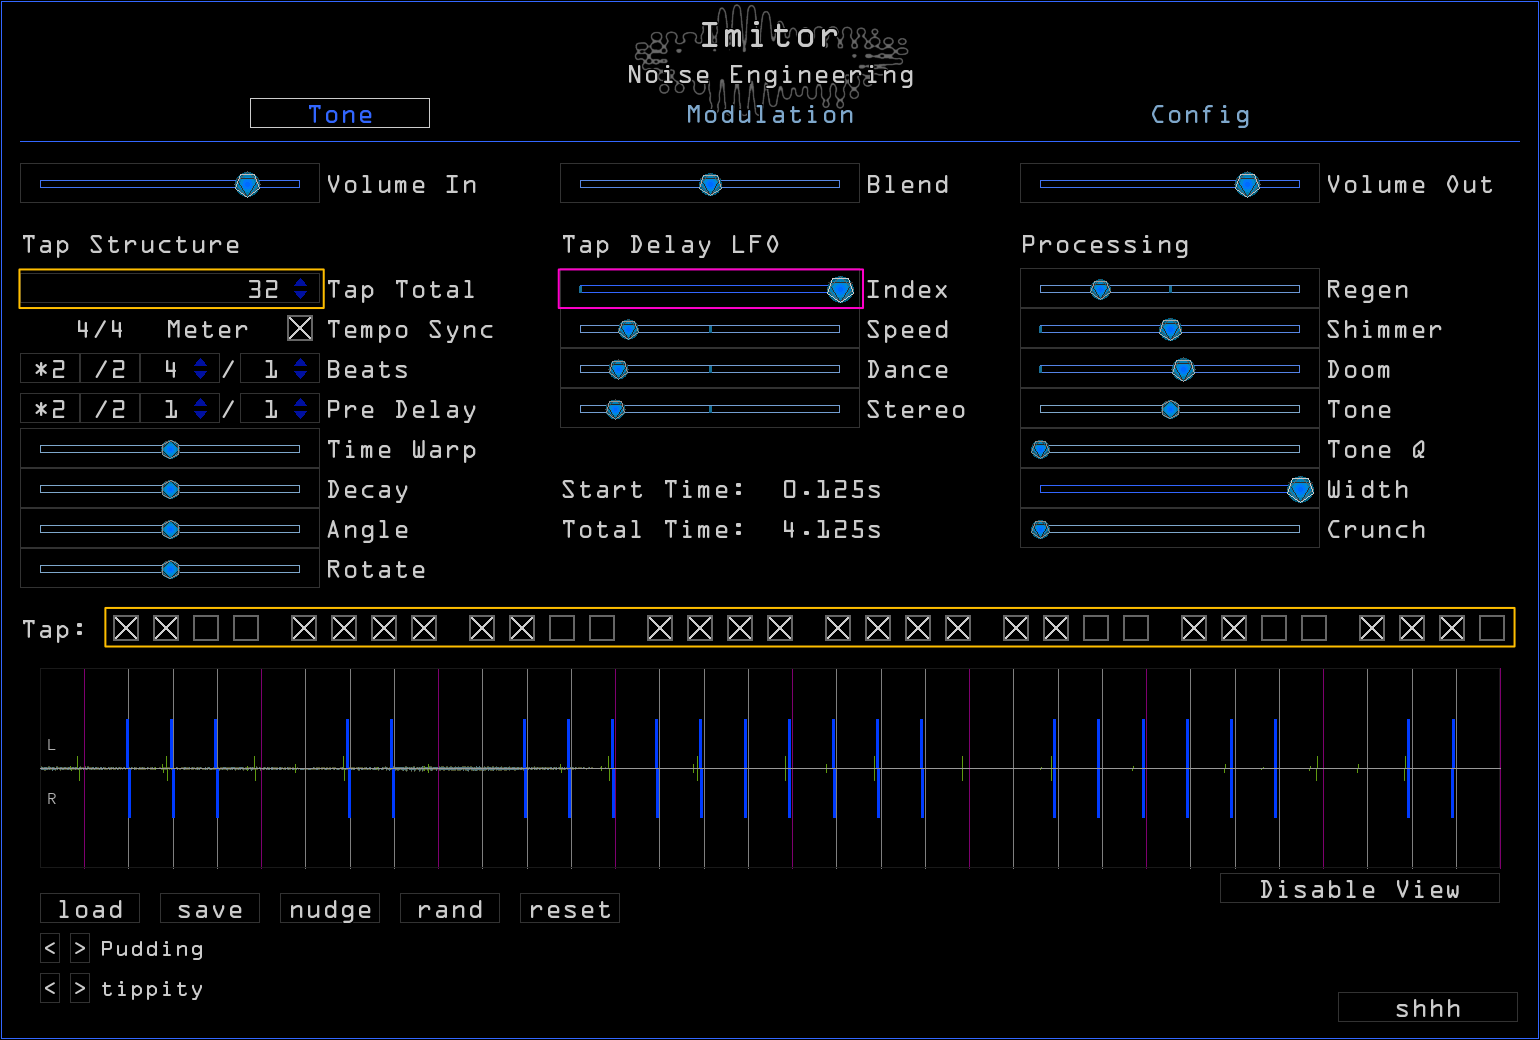 Imitors's tap and modulation controls highlighted